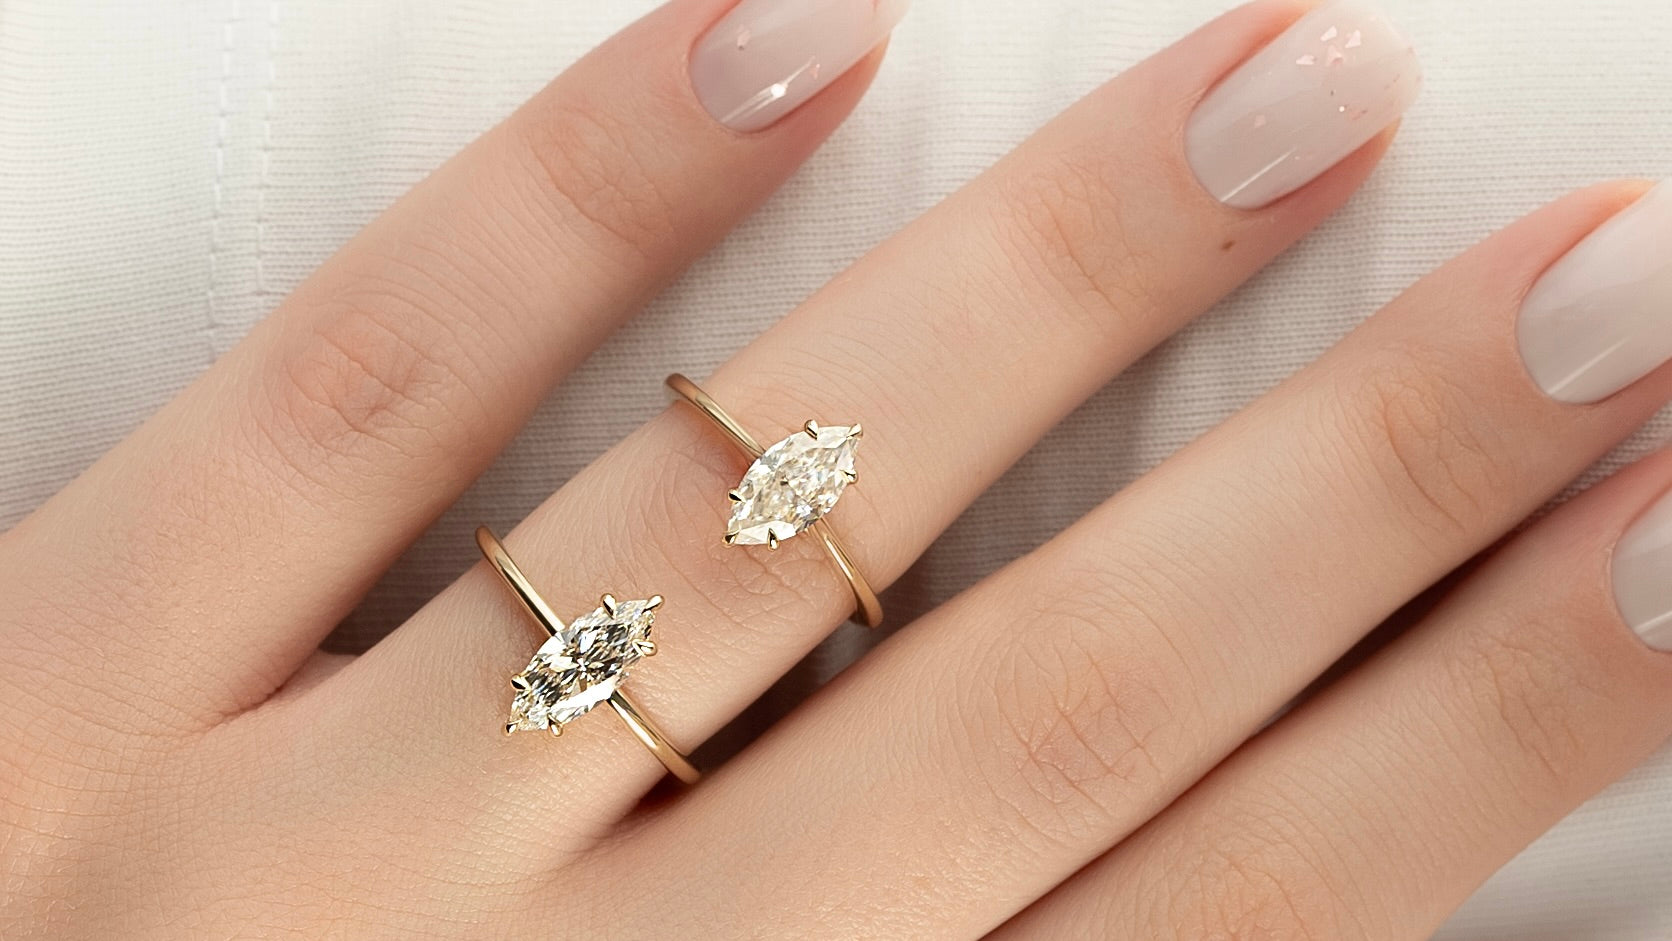 10 Marquise Diamond Engagement Rings You’ll Totally Love